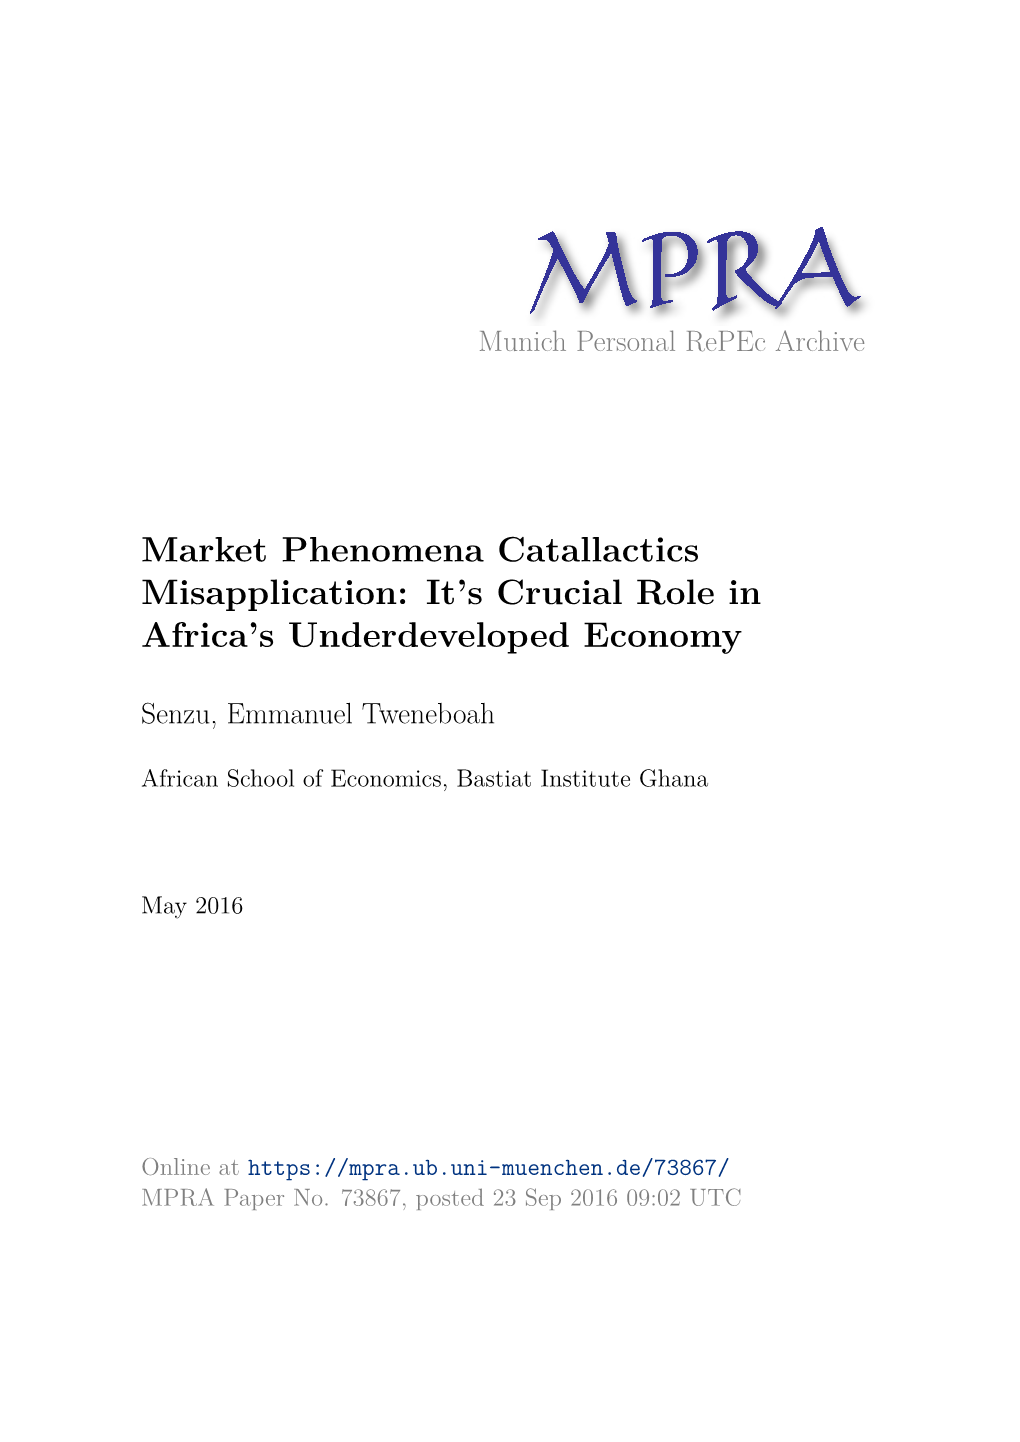 Market Phenomena Catallactics Misapplication: It’S Crucial Role in Africa’S Underdeveloped Economy